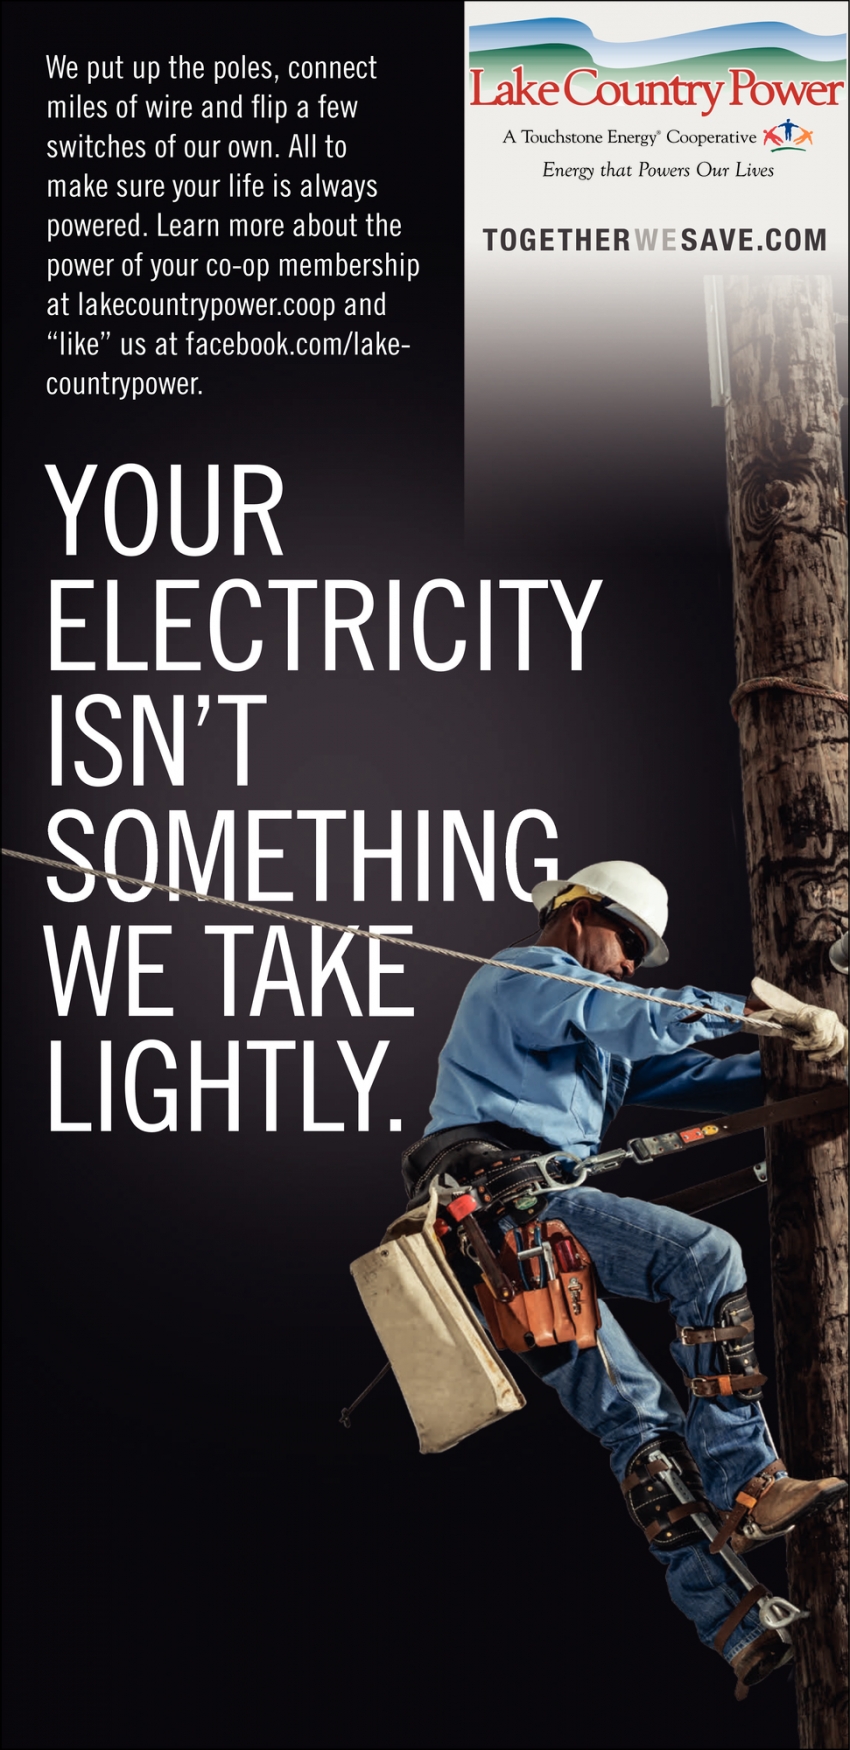 Your Electricity Isn't Something We Take Lightly